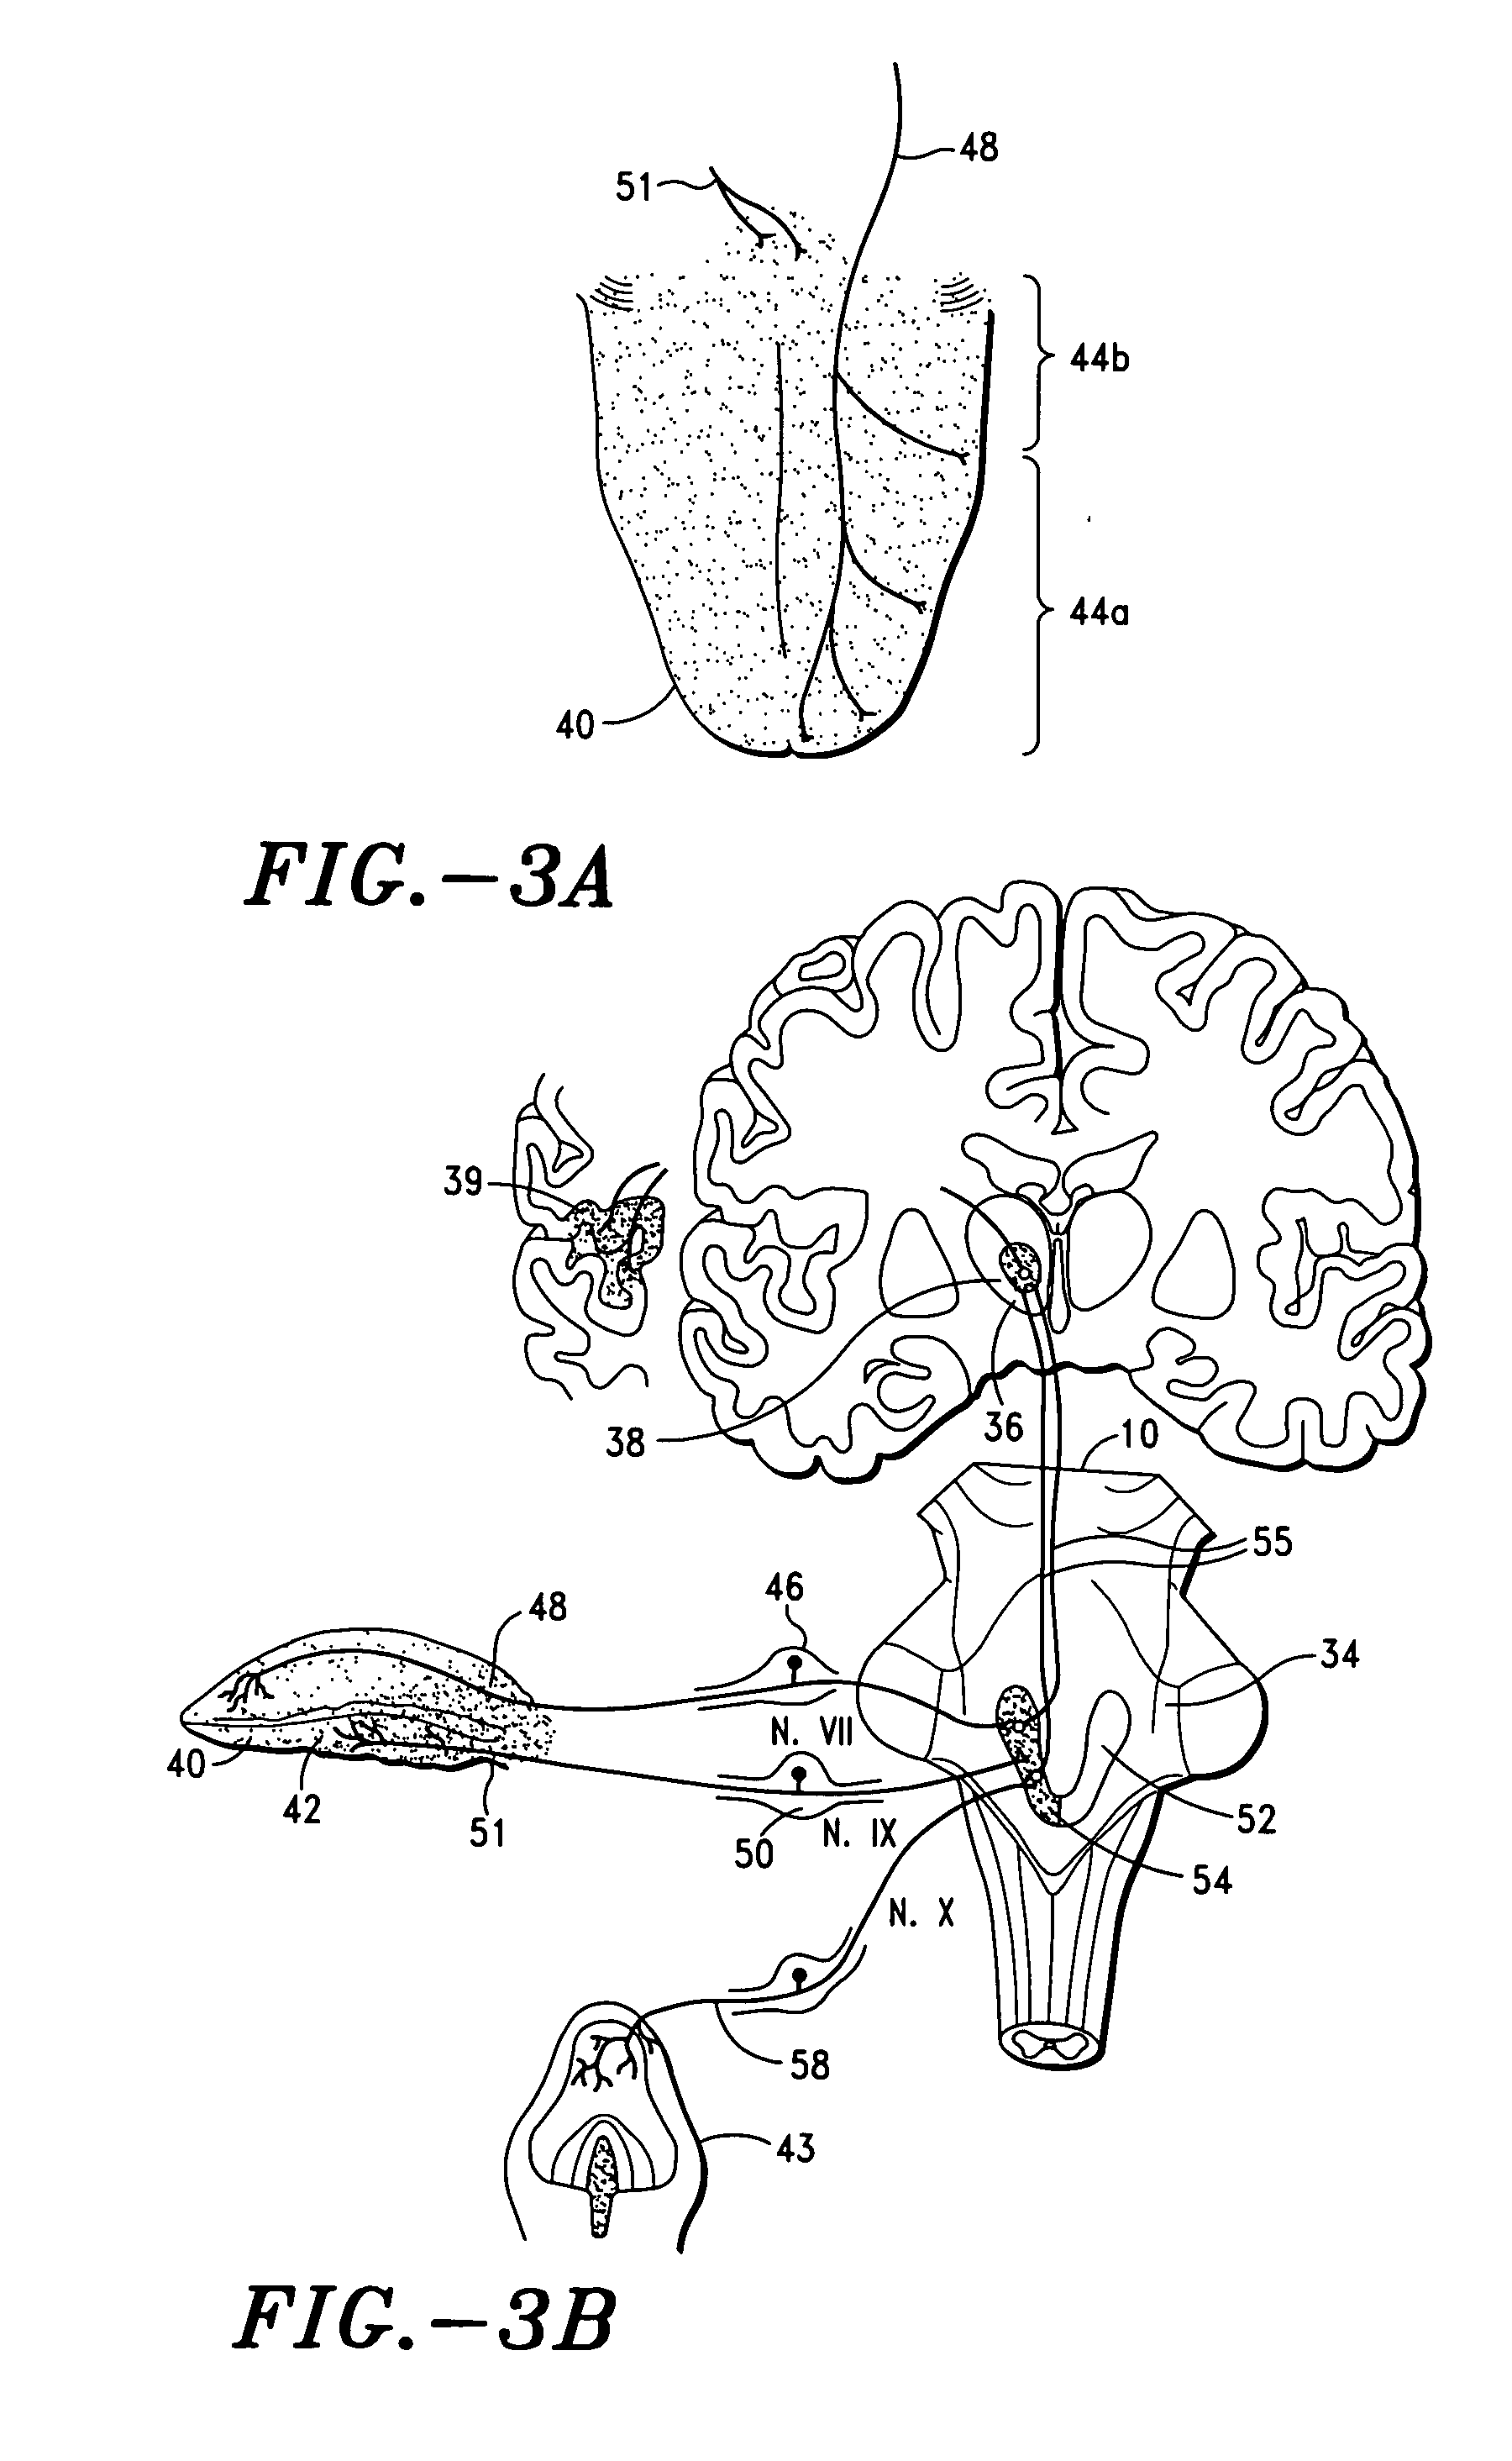 Method and system for modulating eating behavior by means of neuro-electrical coded signals